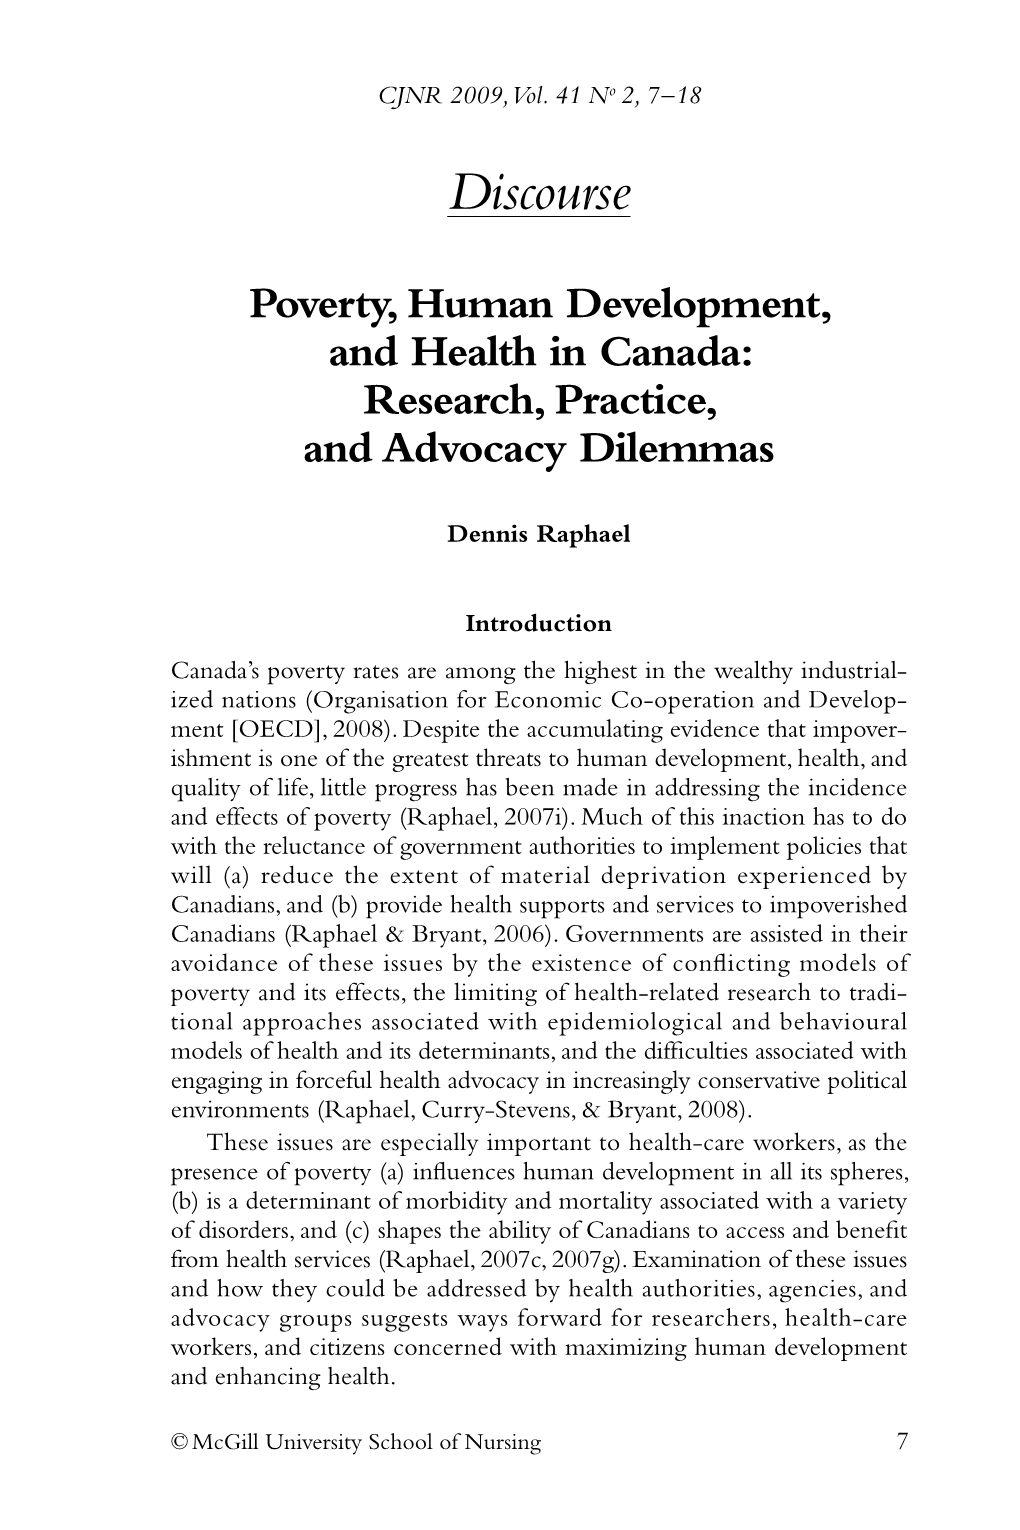 Poverty, Human Development, and Health in Canada: Research